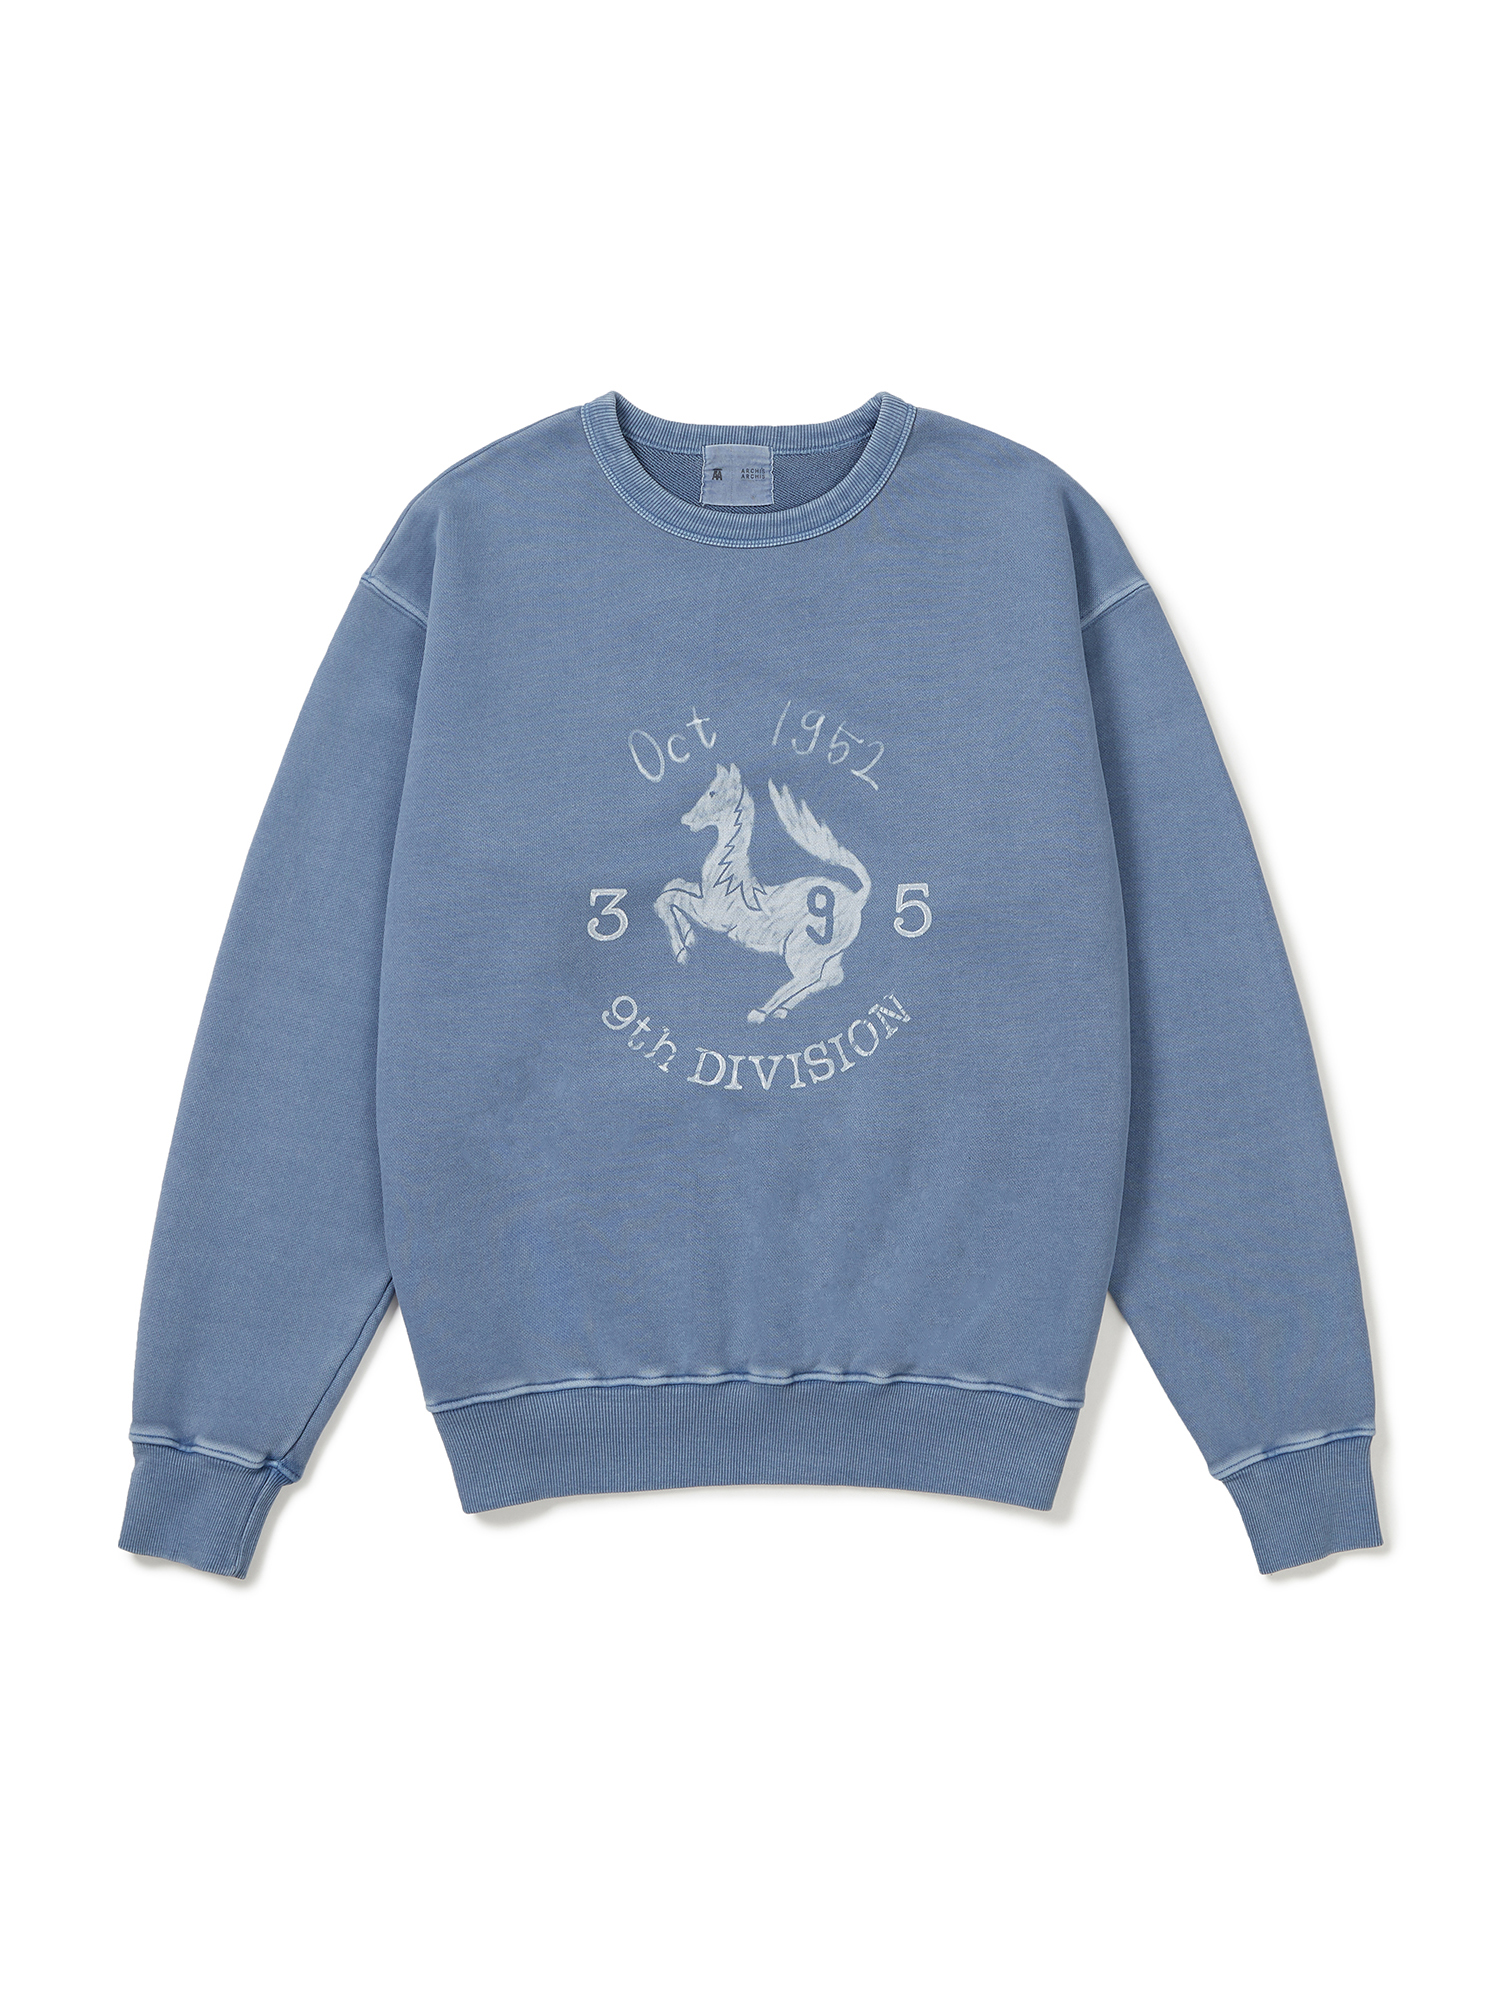 9th Sweat - Pigment Dyeing(Sky Blue)